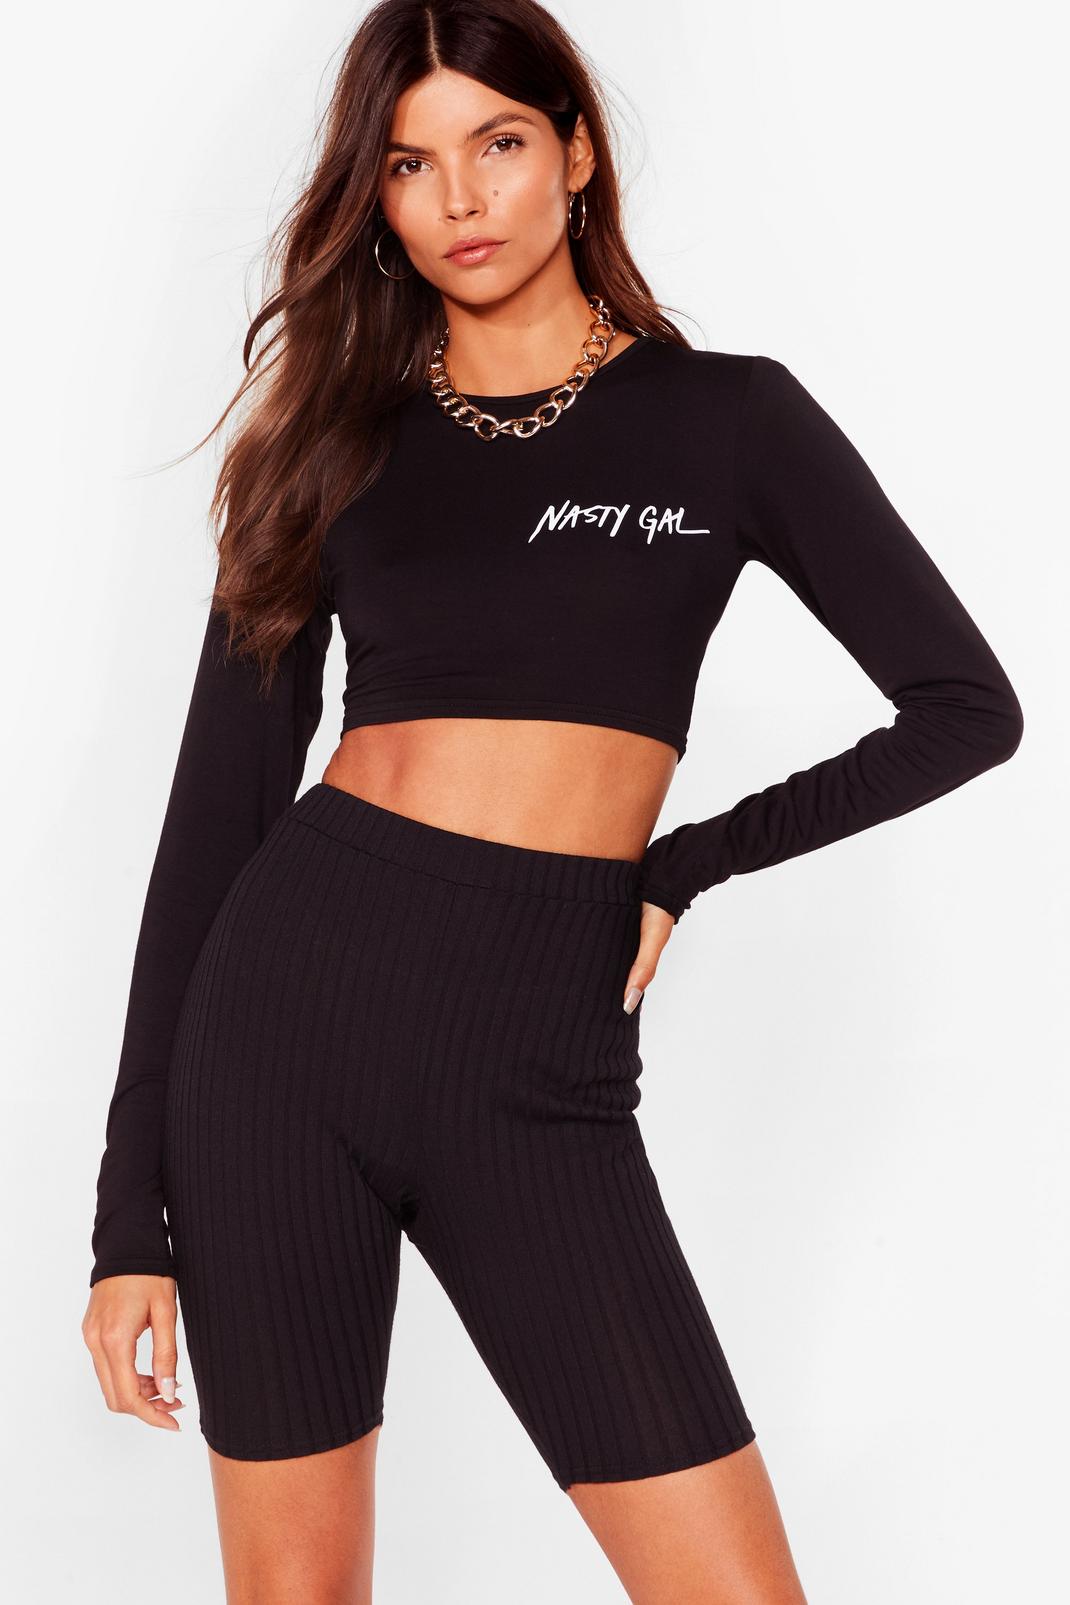 Nothing But a Nasty Gal Crop Top | Nasty Gal